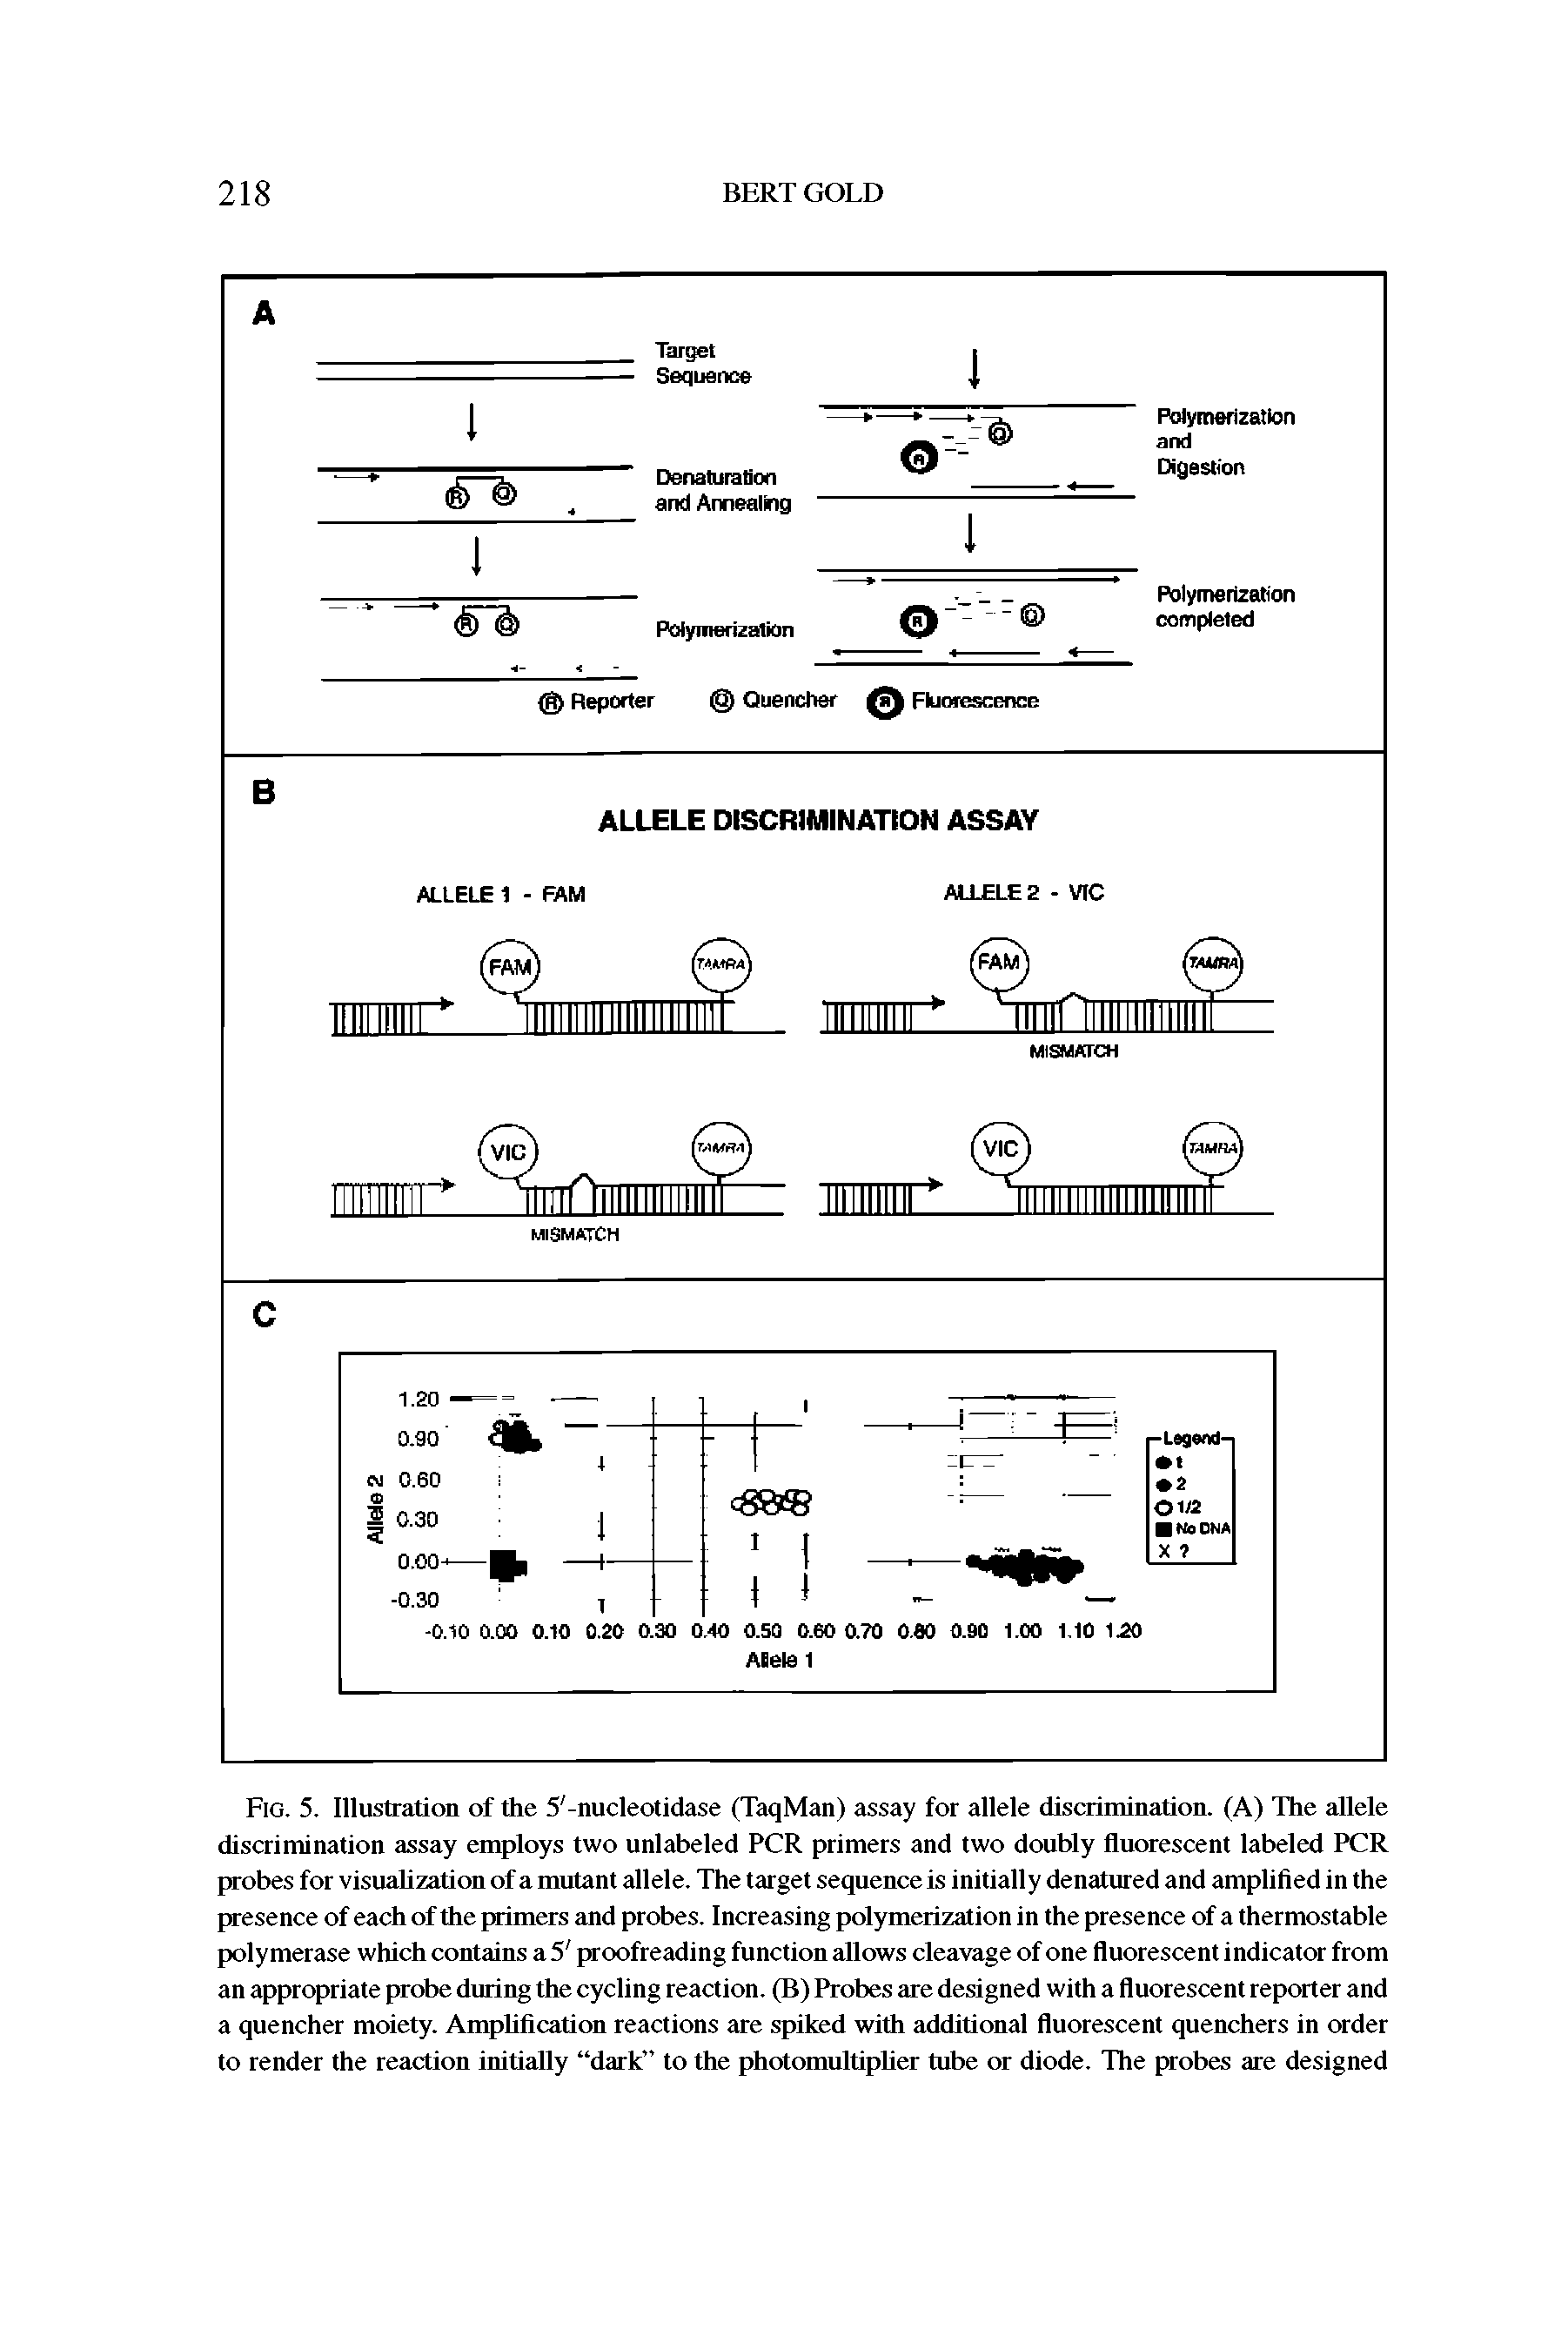 Fig. 5. Illustration of the 5 -nucleotidase (TaqMan) assay for allele discrimination. (A) The allele discrimination assay employs two unlabeled PCR primers and two doubly fluorescent labeled PCR probes for visuaUzation of a mutant allele. The target sequence is initially denatured and amplified in the presence of each of the primers and probes. Increasing polymerization in the presence of a thermostable polymerase which contains a 5 proofreading function allows cleavage of one fluorescent indicator from an appropriate probe during the cycling reaction. (B) Probes are designed with a fluorescent reporter and a quencher moiety. AmpUfication reactions are spiked with additional fluorescent quenchers in order to render the reaction initially dark to the photomultipUer mbe or diode. The probes are designed...